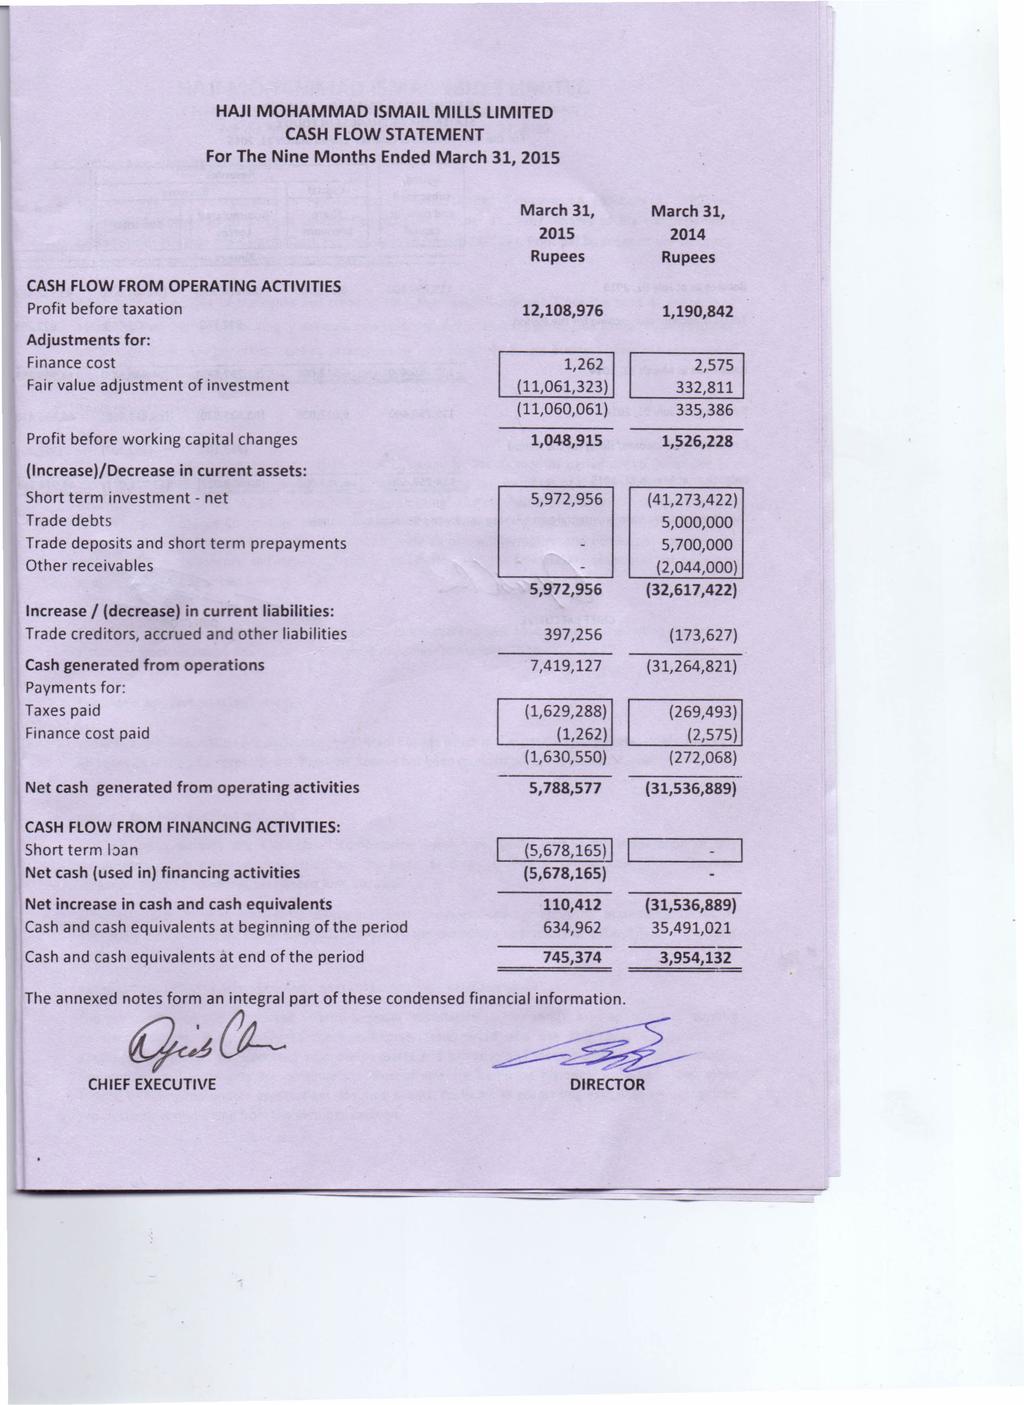 HAJI MOHAMMAD ISMAil MillS LIMITED CASH now STATEMENT For The Nine Months Ended March 31, 2015 CASH flow FROM OPERATING ACTIVITIES March 31, 2015 Profit before taxation 12,108,976 Adjustments Finance